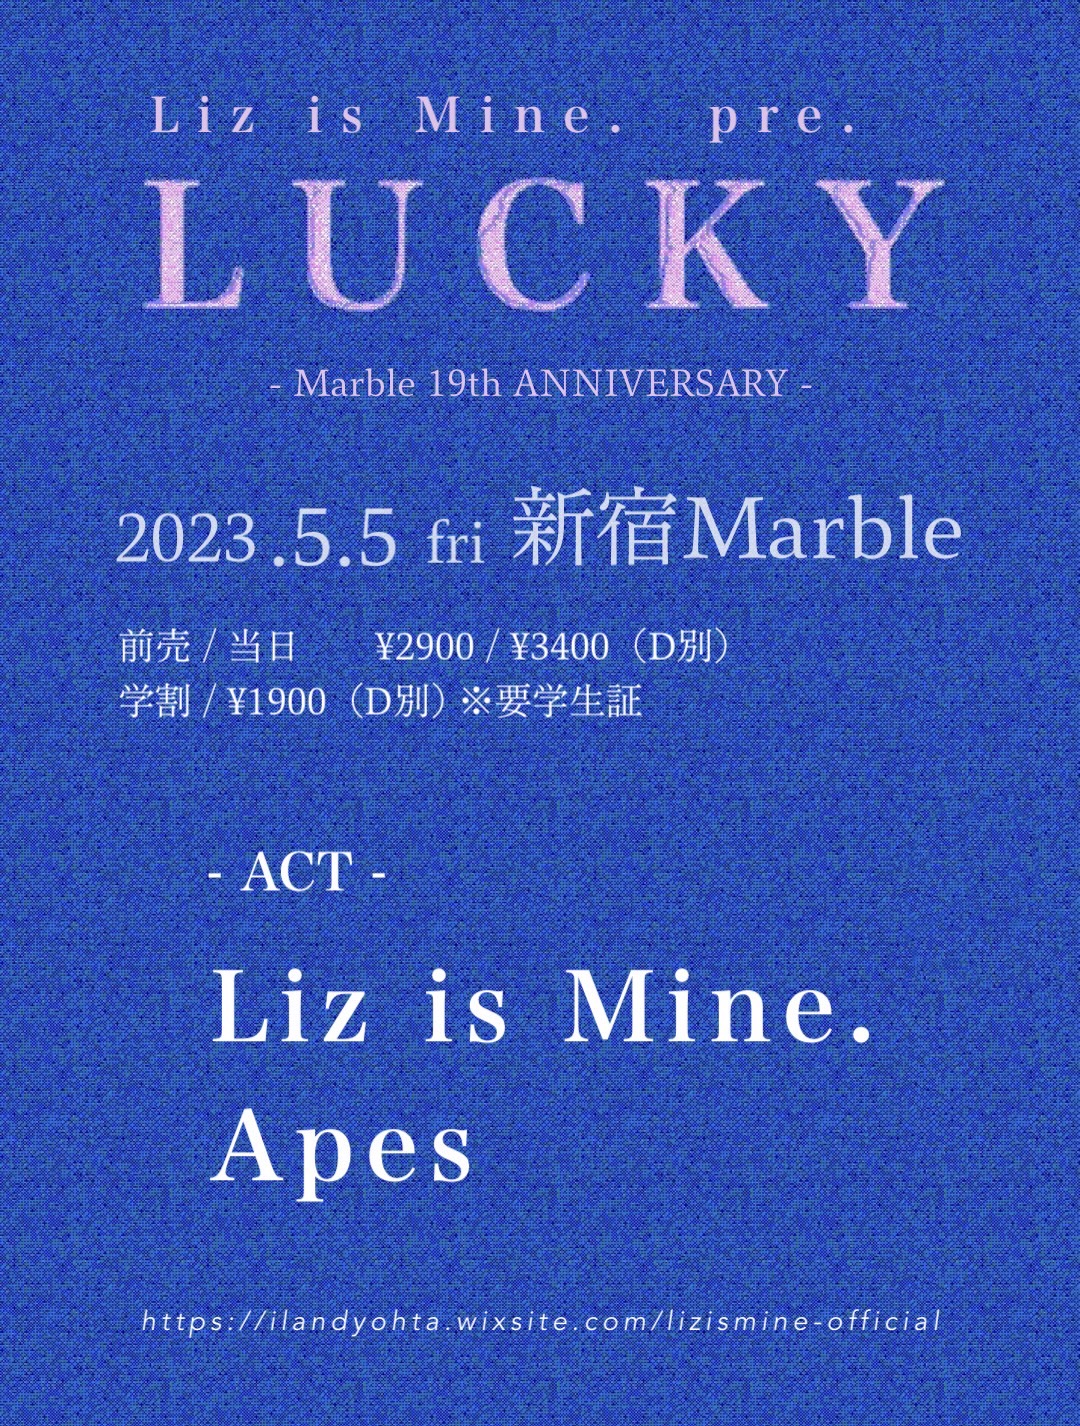 Liz is Mine.東名阪群馬ショートライブツアーファイナル「LUCKY」-Marble 19th ANNIVERSARY -